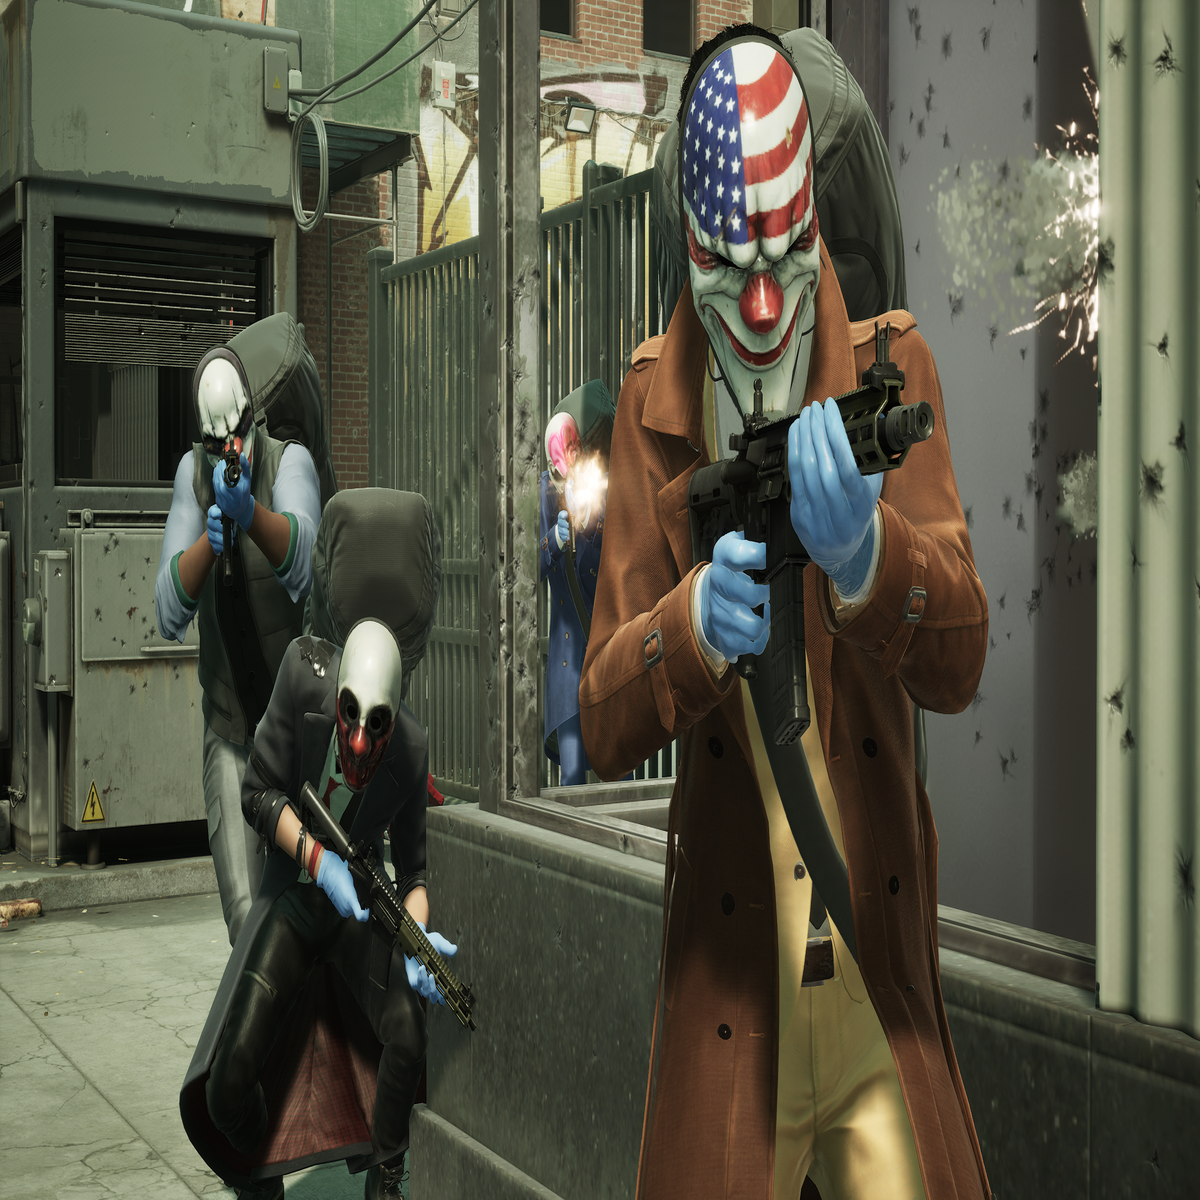 PAYDAY 3 • PAYDAY Official Site